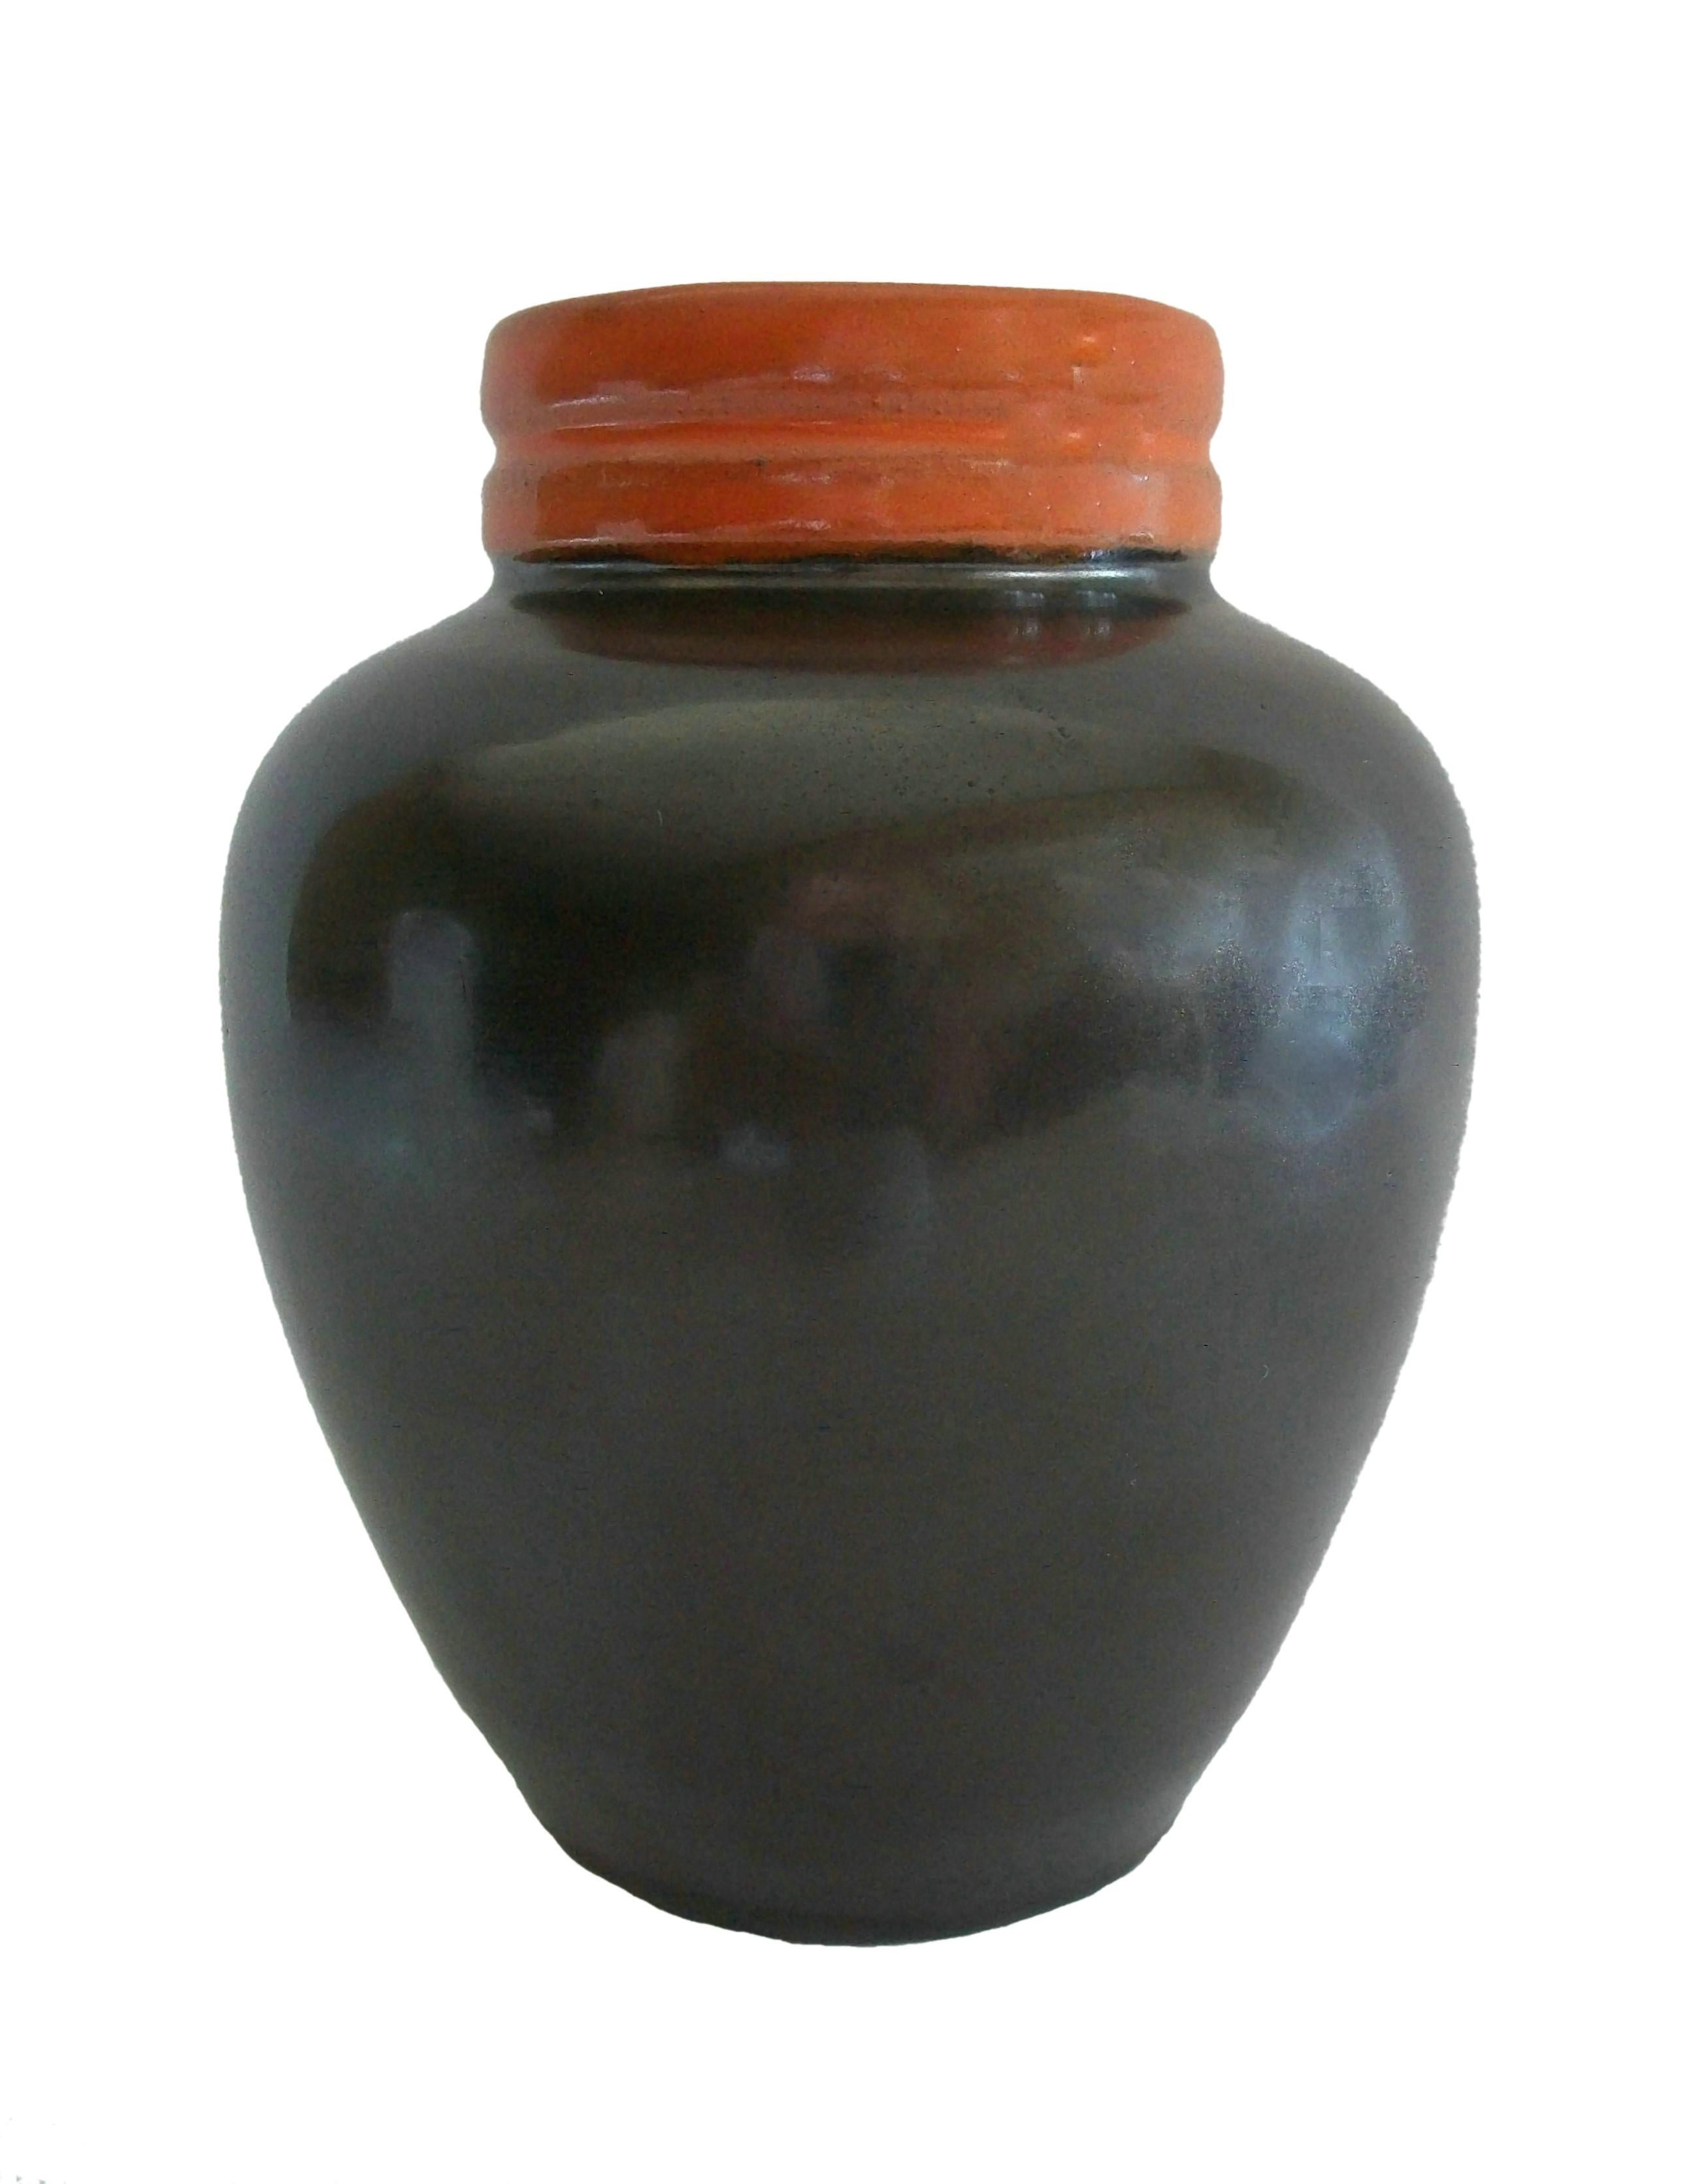 UPSALA EKEBY - Mid Century studio ceramic vase - black satin glaze over the red clay body with rust colored band to the neck - signed 'EKEBY 1504' on the base - Sweden - circa 1950.

Excellent vintage condition - no loss - no damage - no restoration